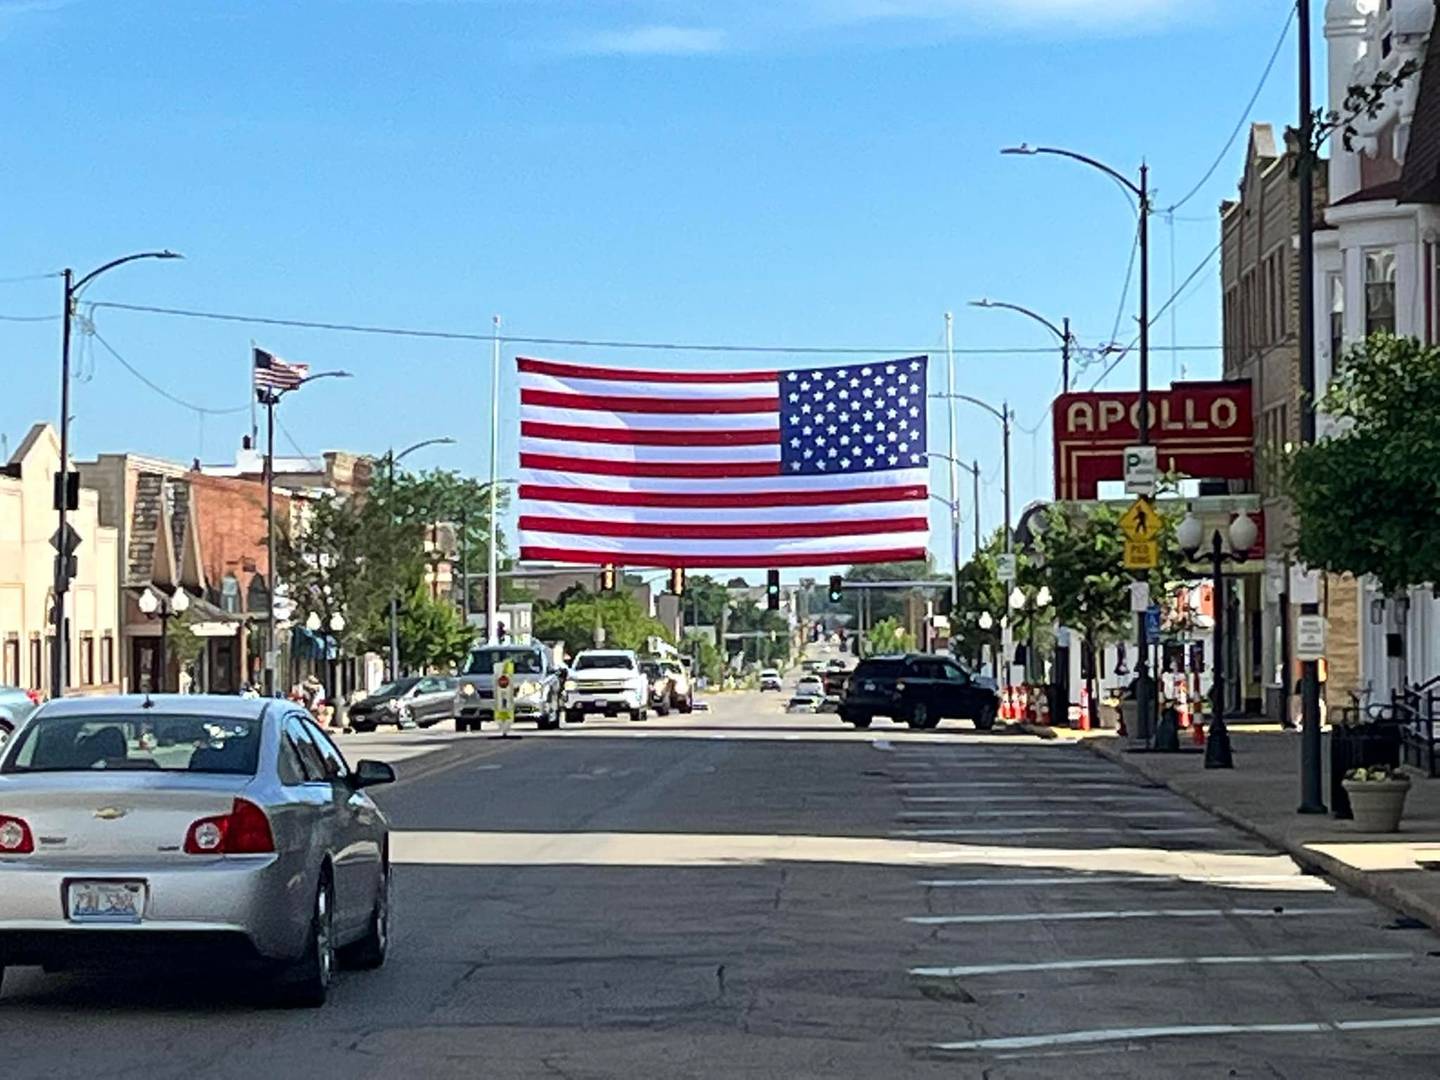 A 60-by-30 foot American flag was set up over Main Street in Princeton on Friday morning, June 17, 2022, ahead of the city’s first summer concert, but the flag poles snapped and the pole supporting the flag landed on the ground.